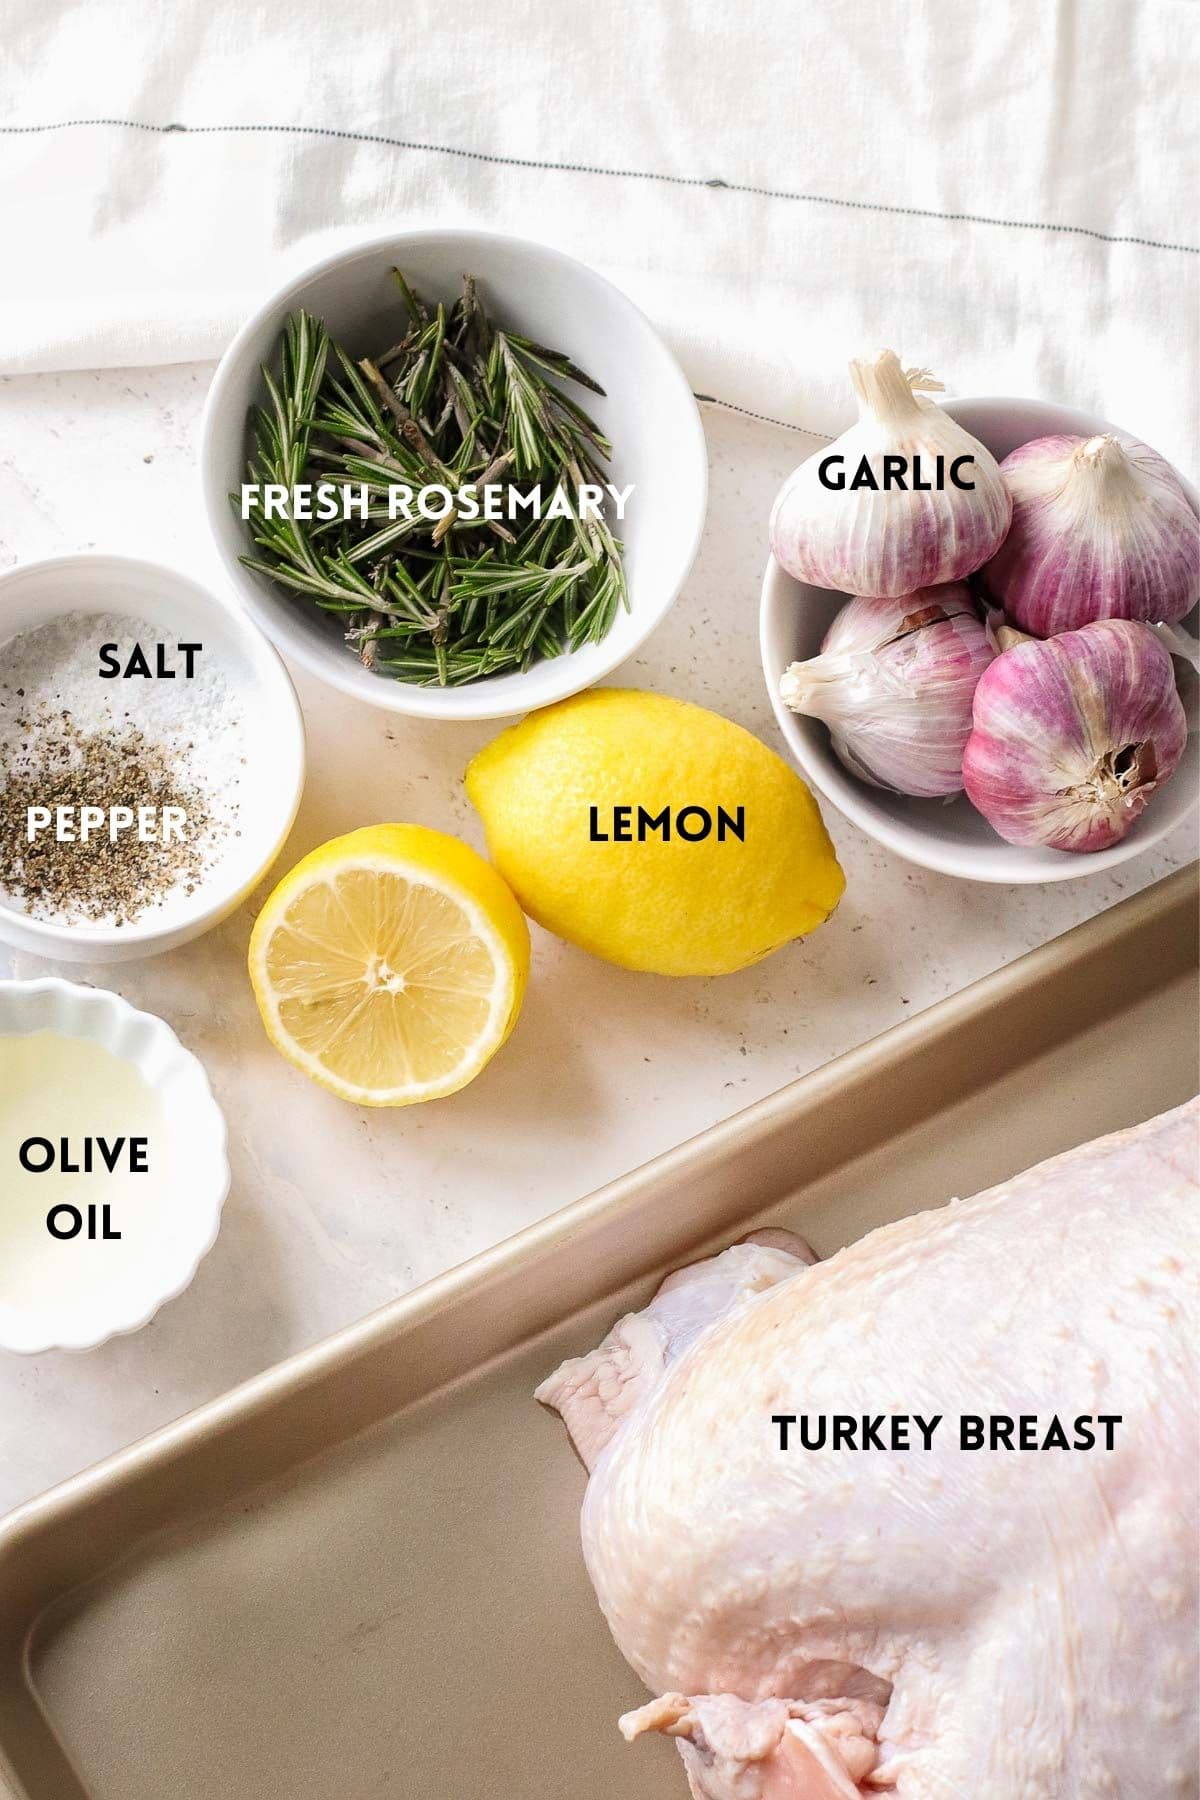 Ingredients for making the recipe